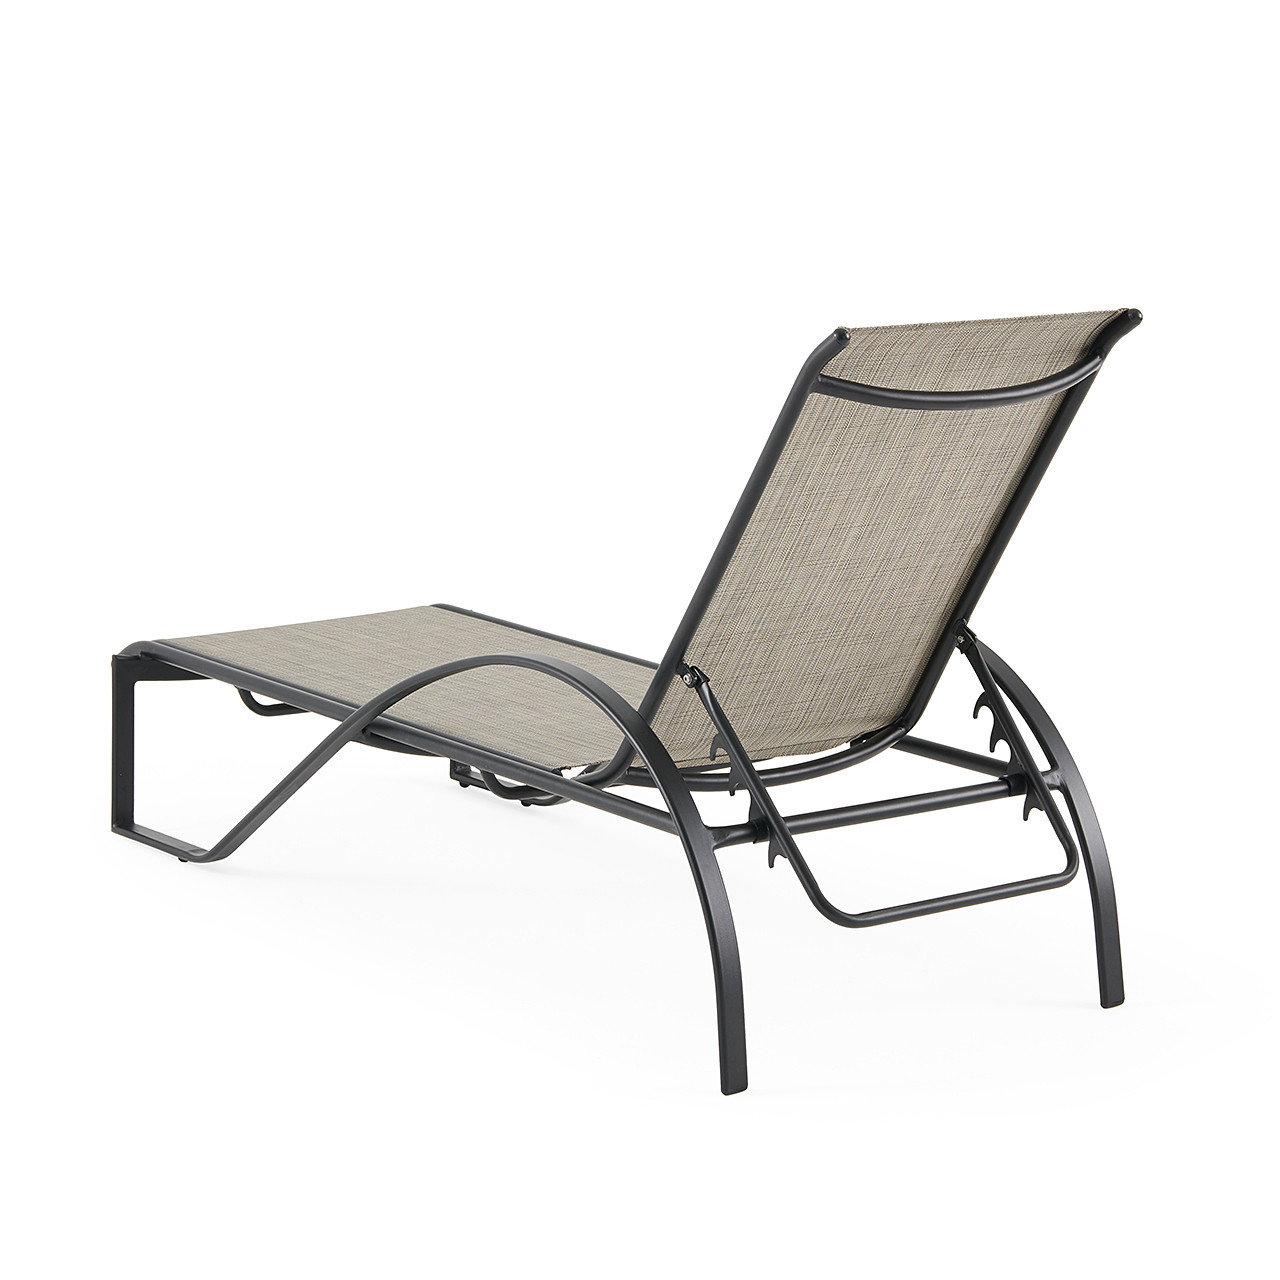 South Beach Aluminum with Banket Sling Chaise Lounge